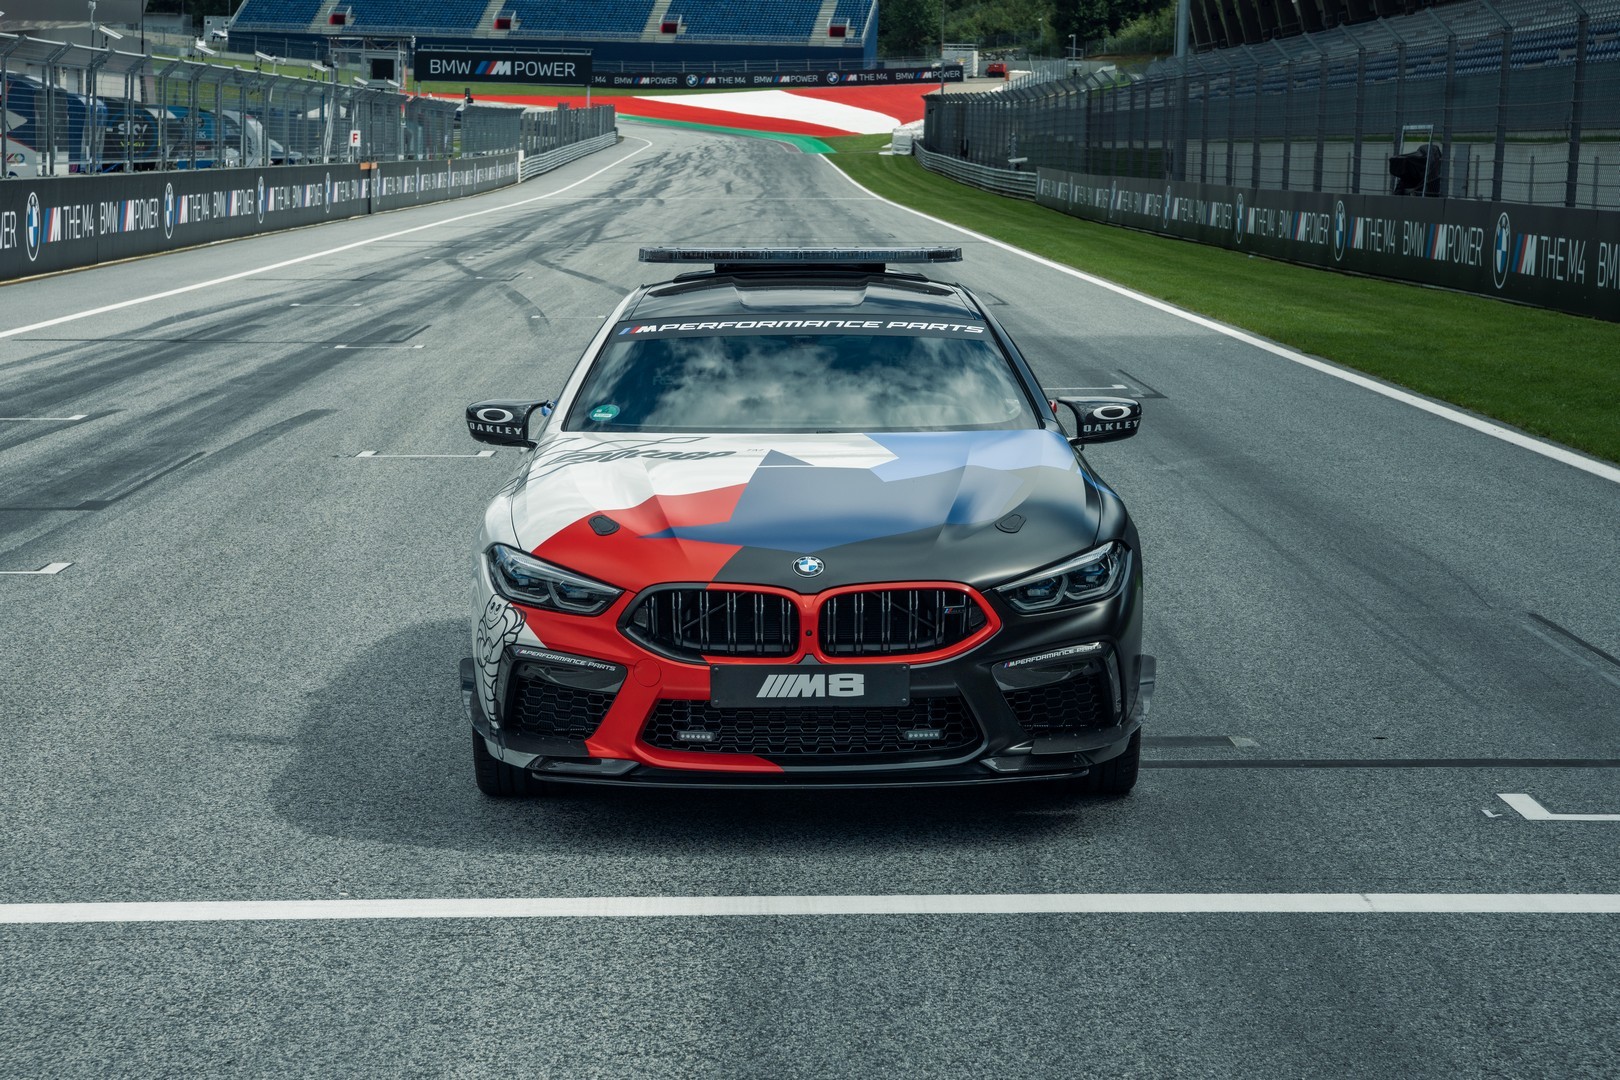 2019 - [BMW] Série 8 Gran Coupé [G16] - Page 7 Bmw-surprisingly-turned-the-new-m8-gran-coupe-into-a-safety-car-for-motogp_15